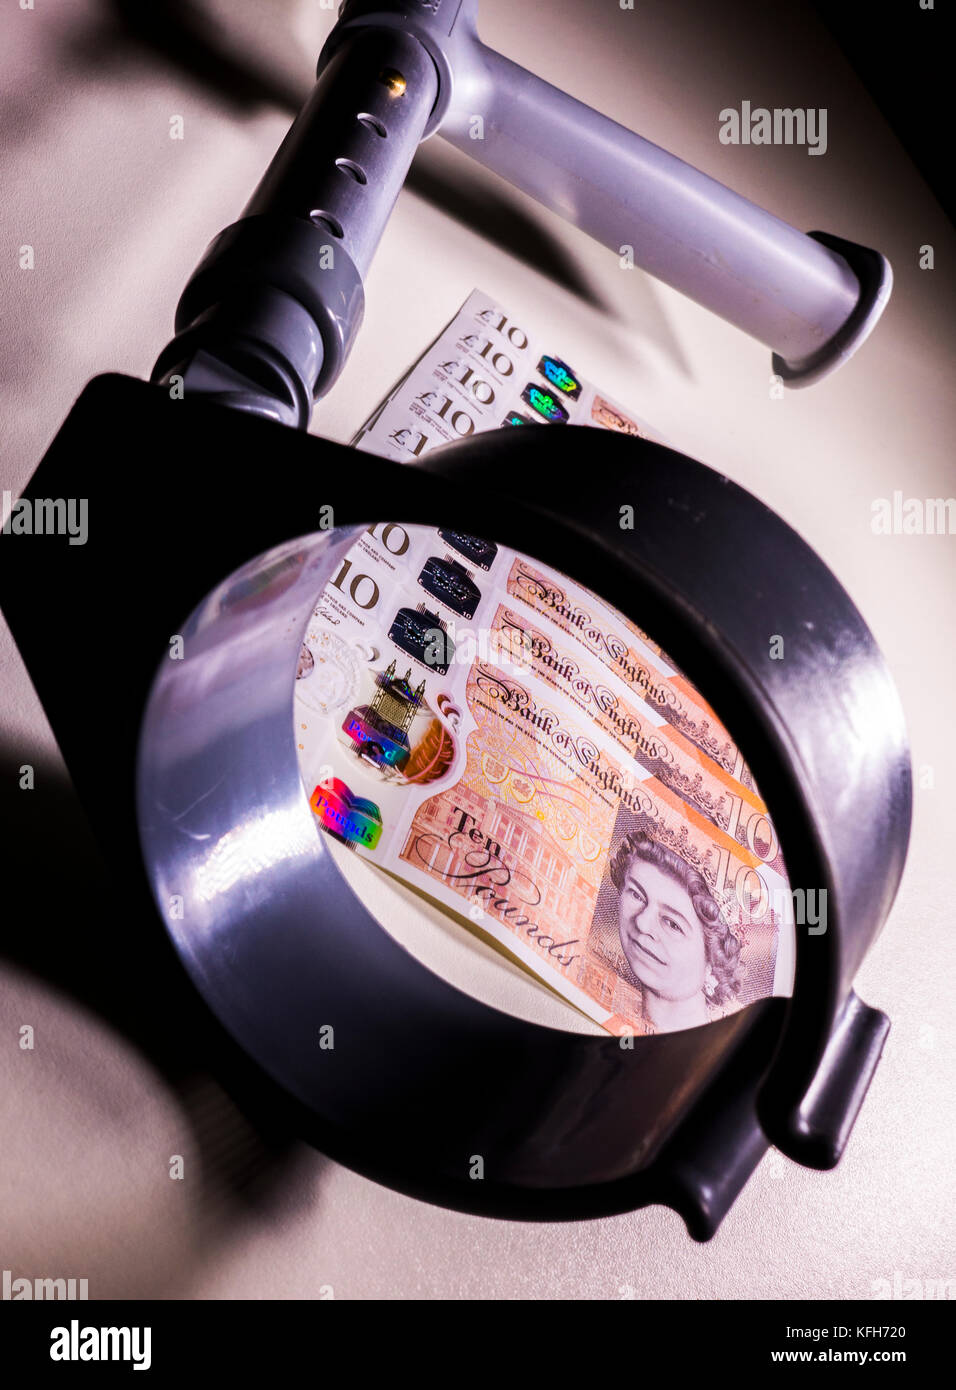 Crutch and new polymer sterling £10 ten pound notes. Concept of link between incapacity and UK pounds, such as disability income and healthcare cost. Stock Photo